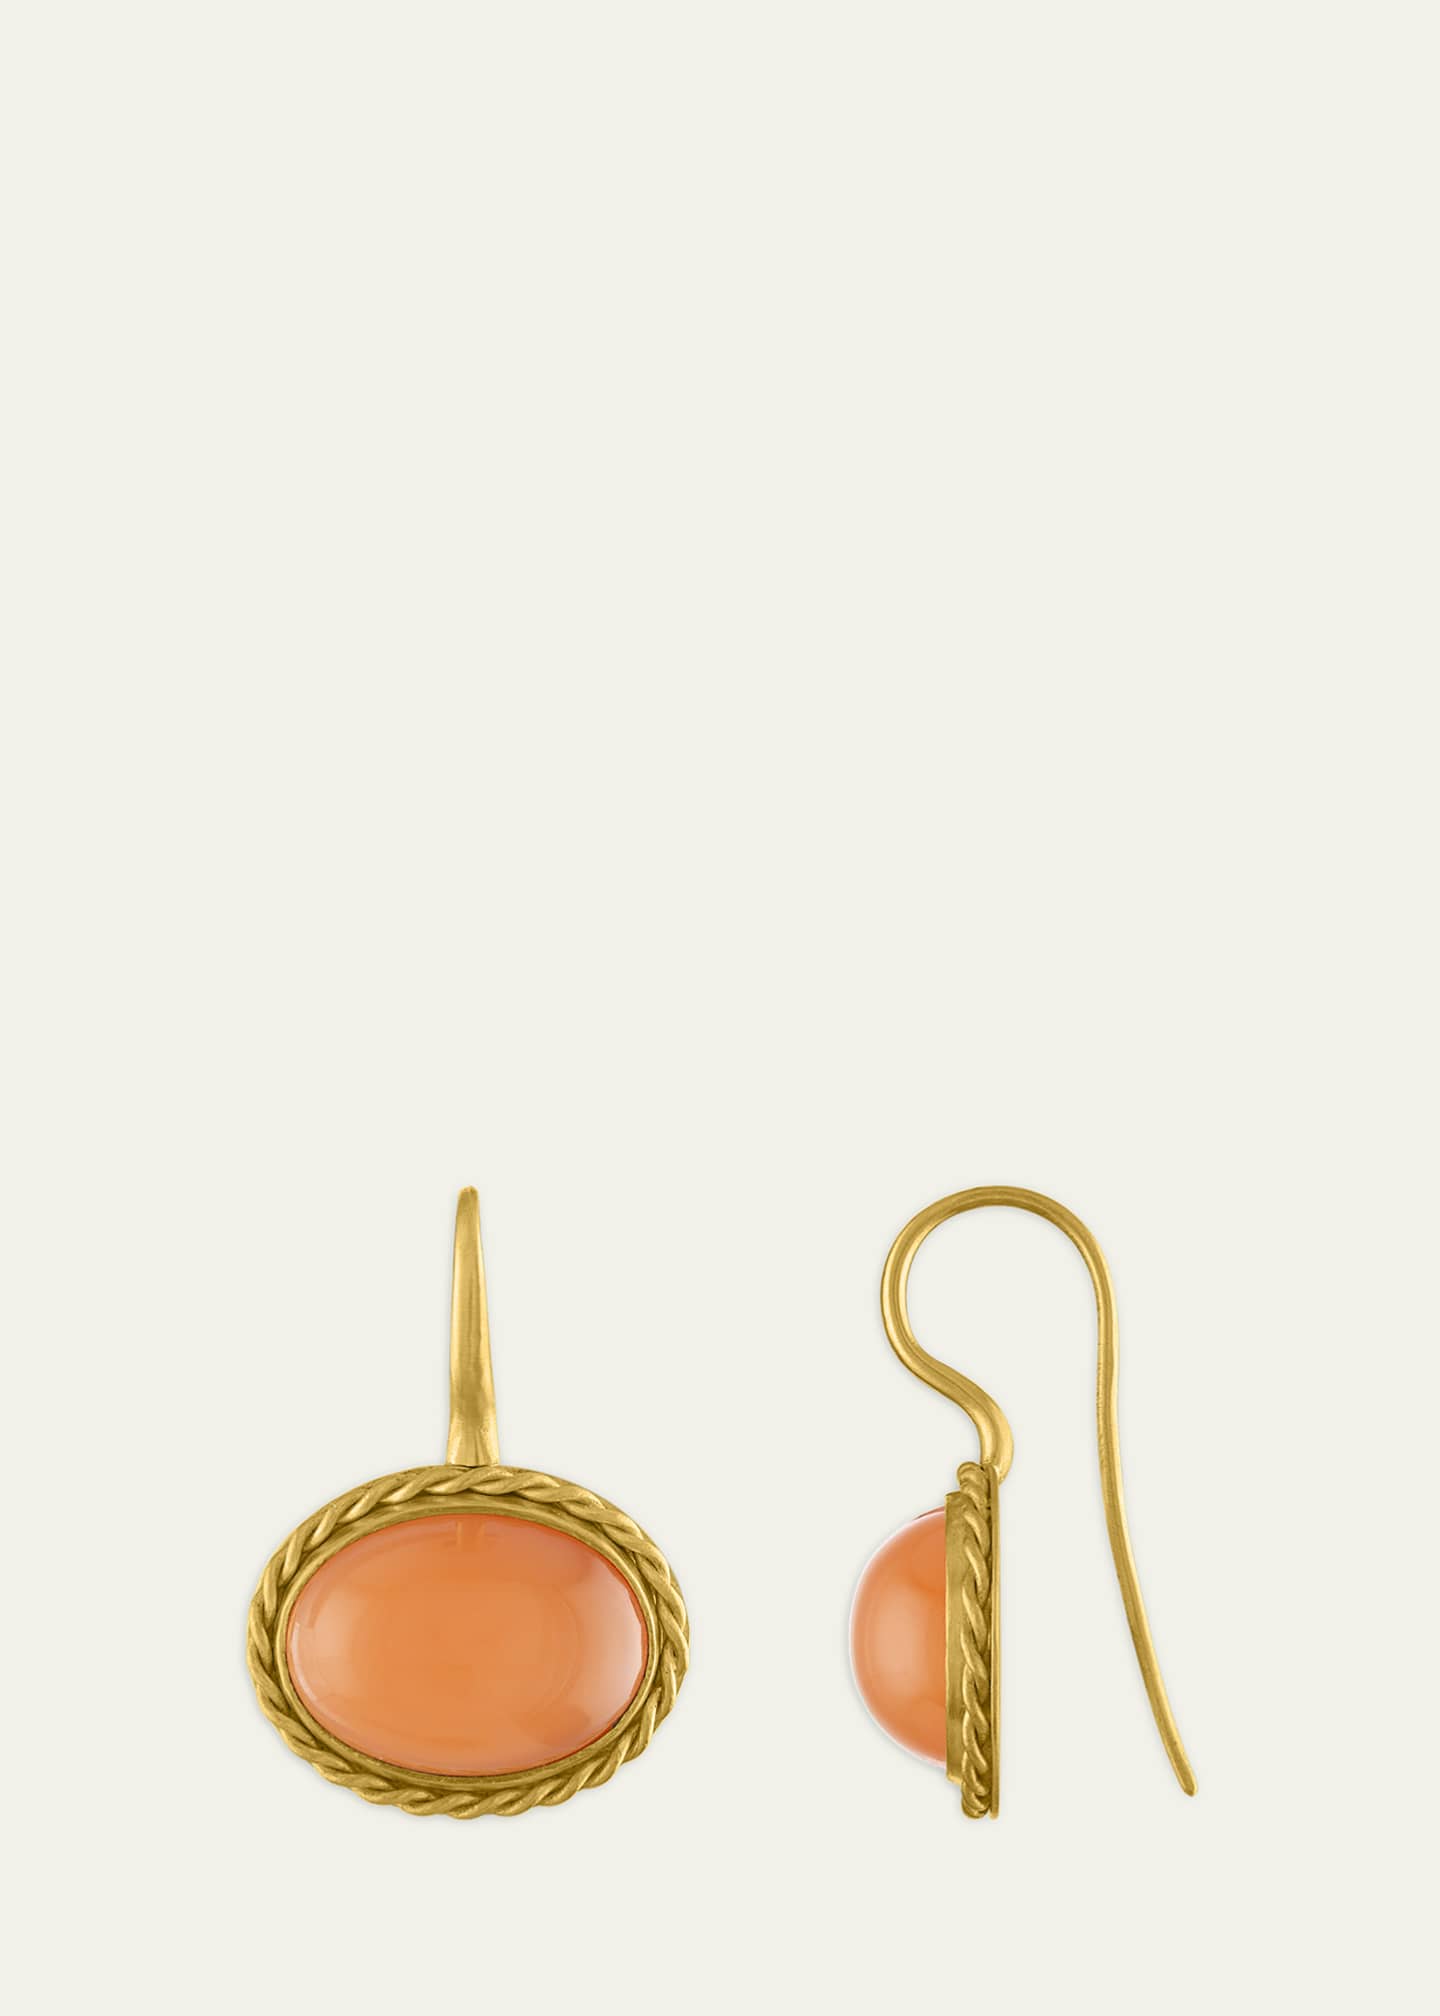 Prounis 22kt yellow gold moon stone earrings